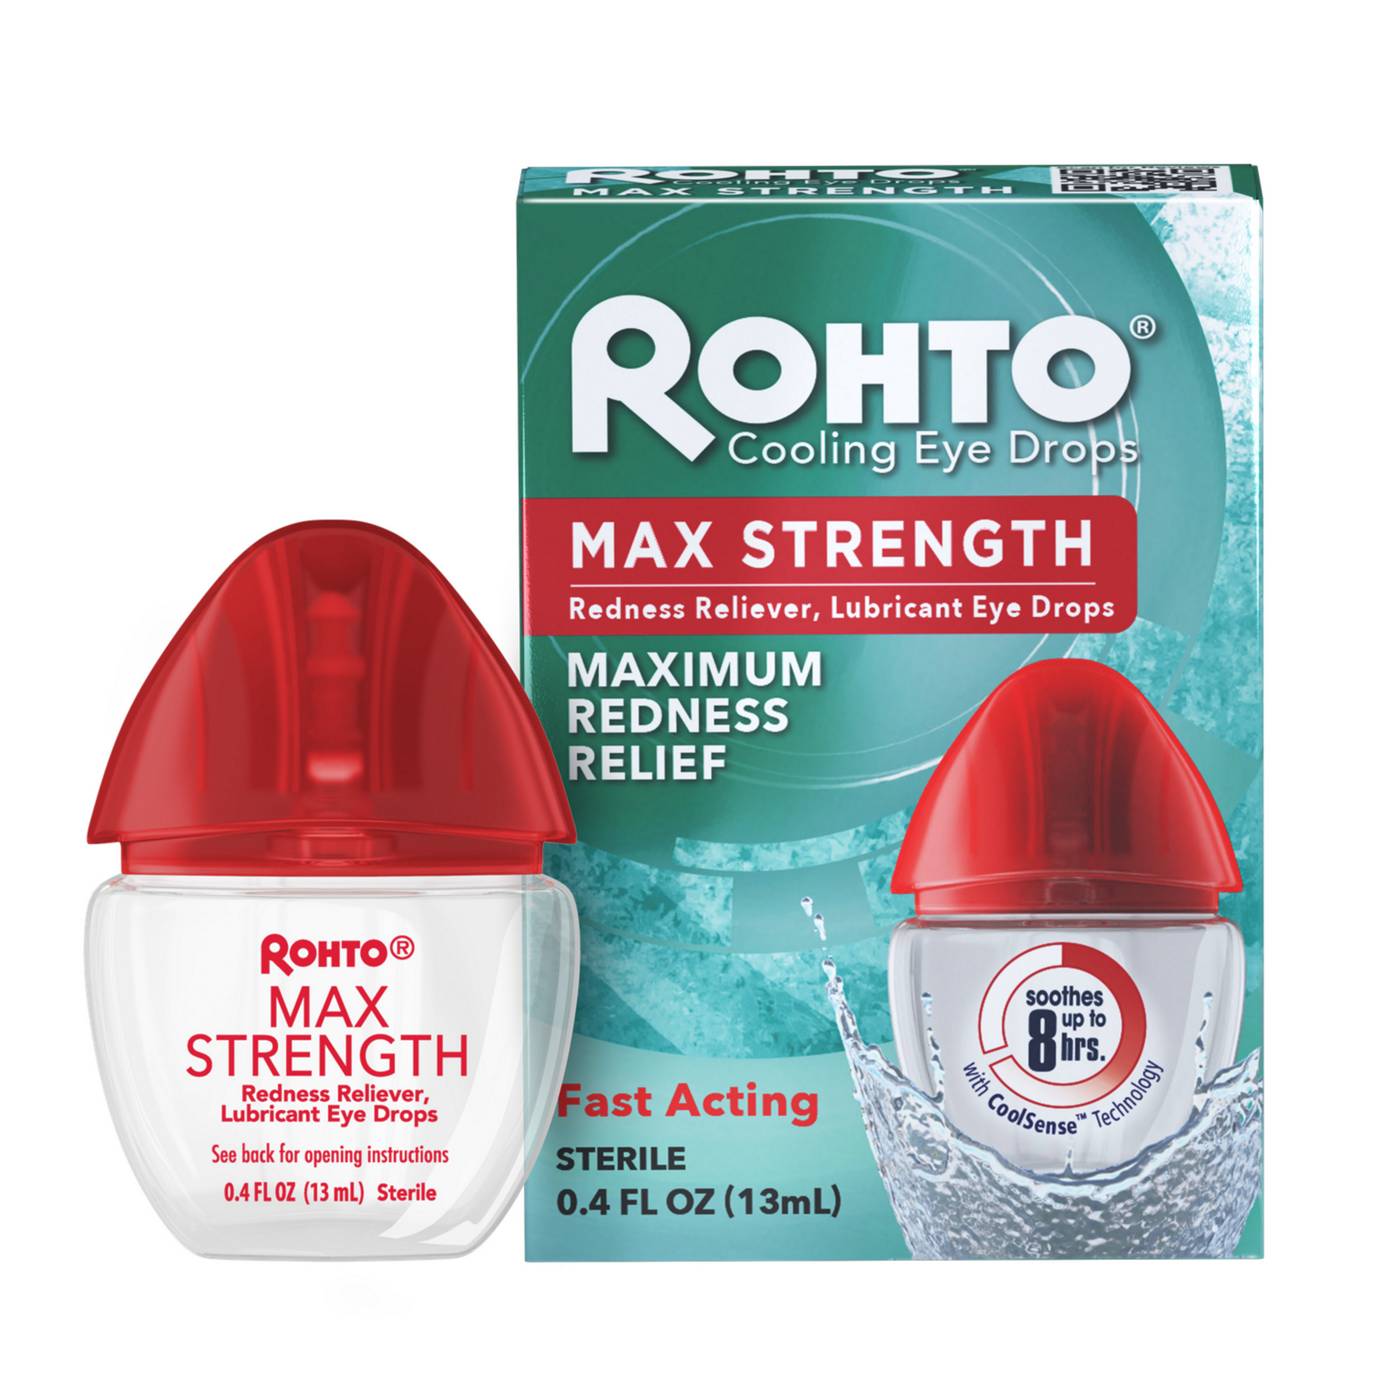 Rohto Max Strength Redness Relieving Eye Drops; image 2 of 3